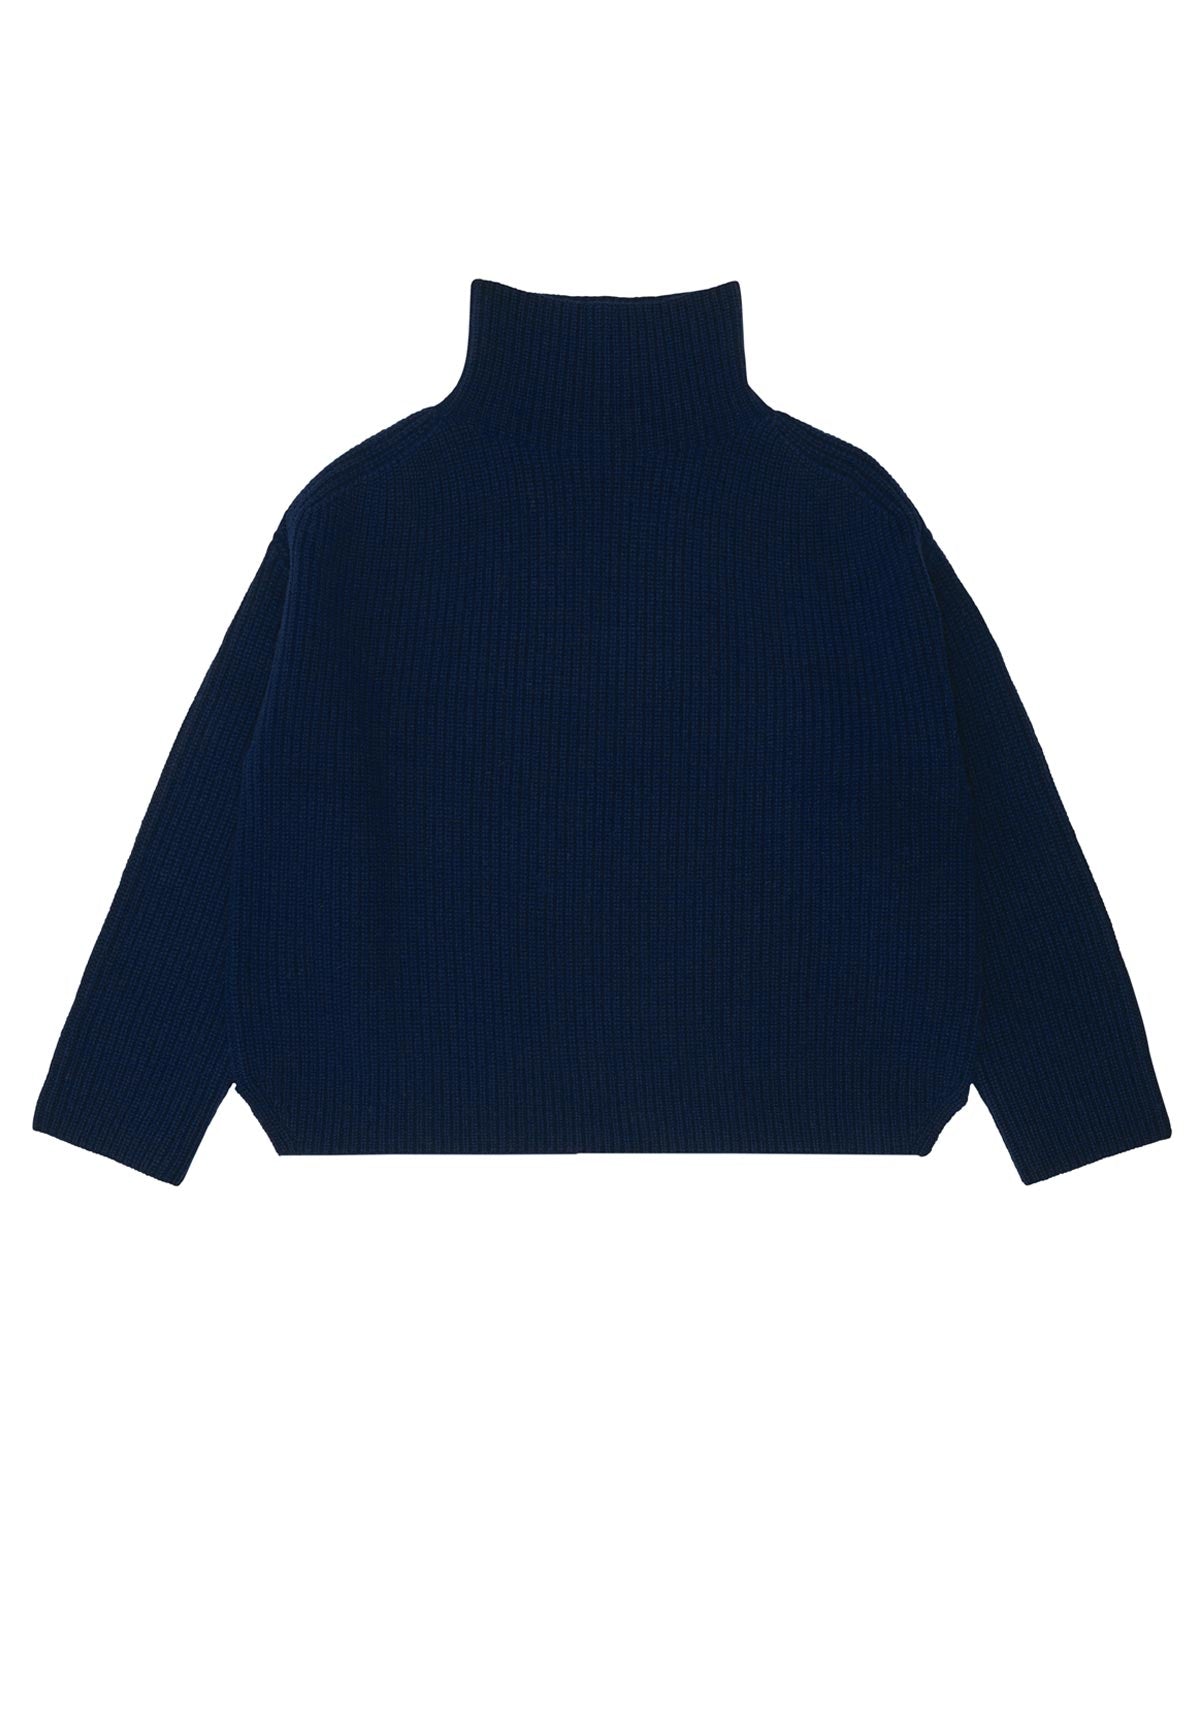 LAMBSWOOL STRUCTURE SWEATER ROYAL BLUE